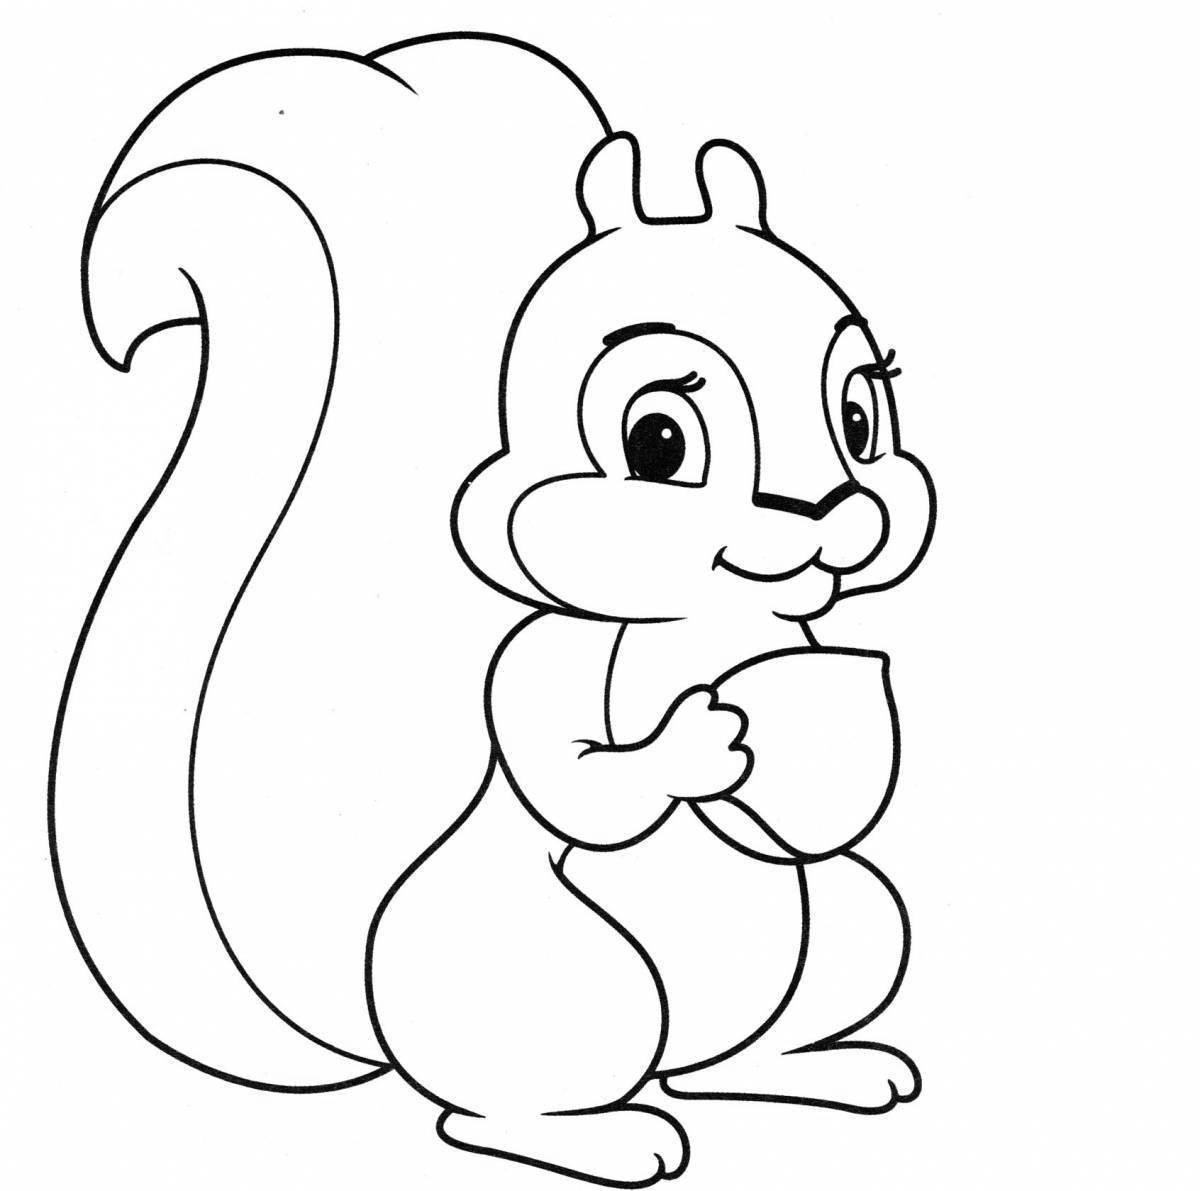 Charming squirrel drawing